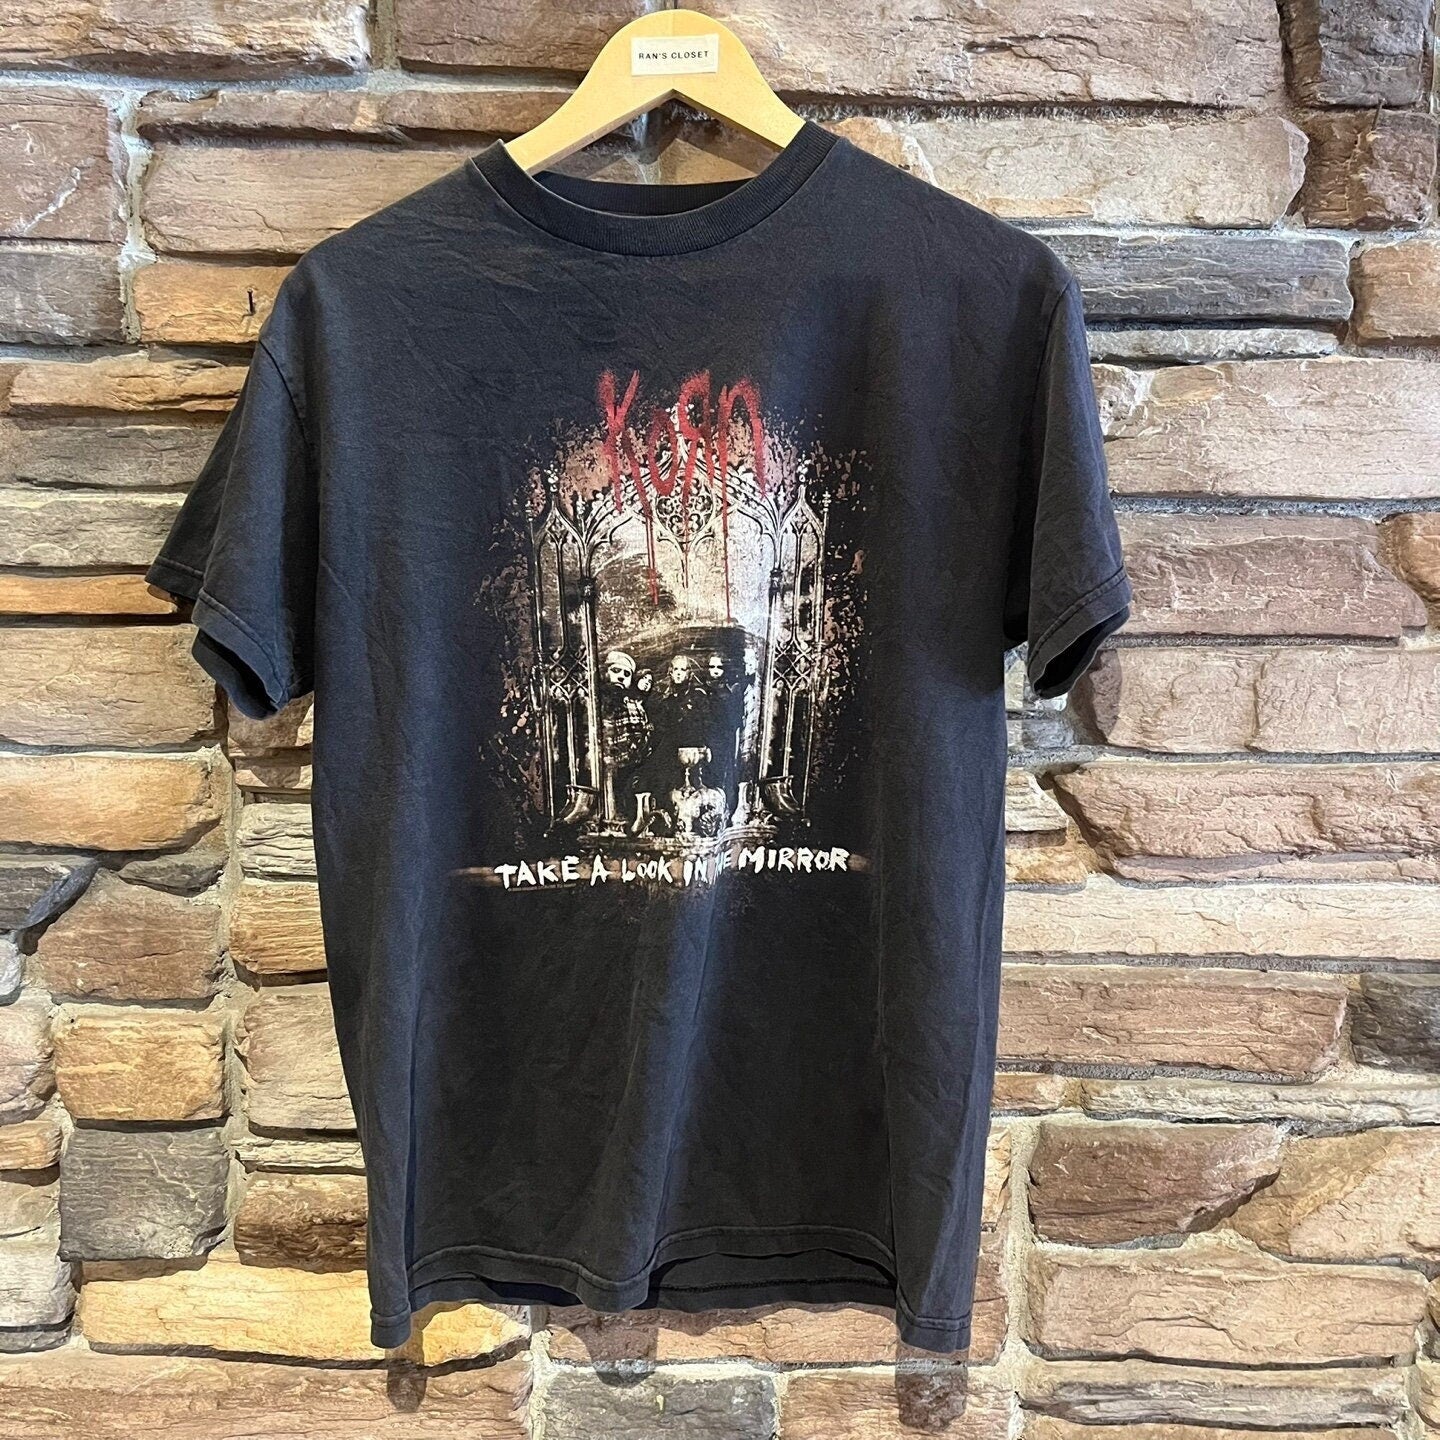 Vintage Korn "Take A Look In The Mirror" Album T-Shirt | Vintage Band Shirt | Vintage Korn T-Shirt | Men's Size Small | SKU: STQ-3307